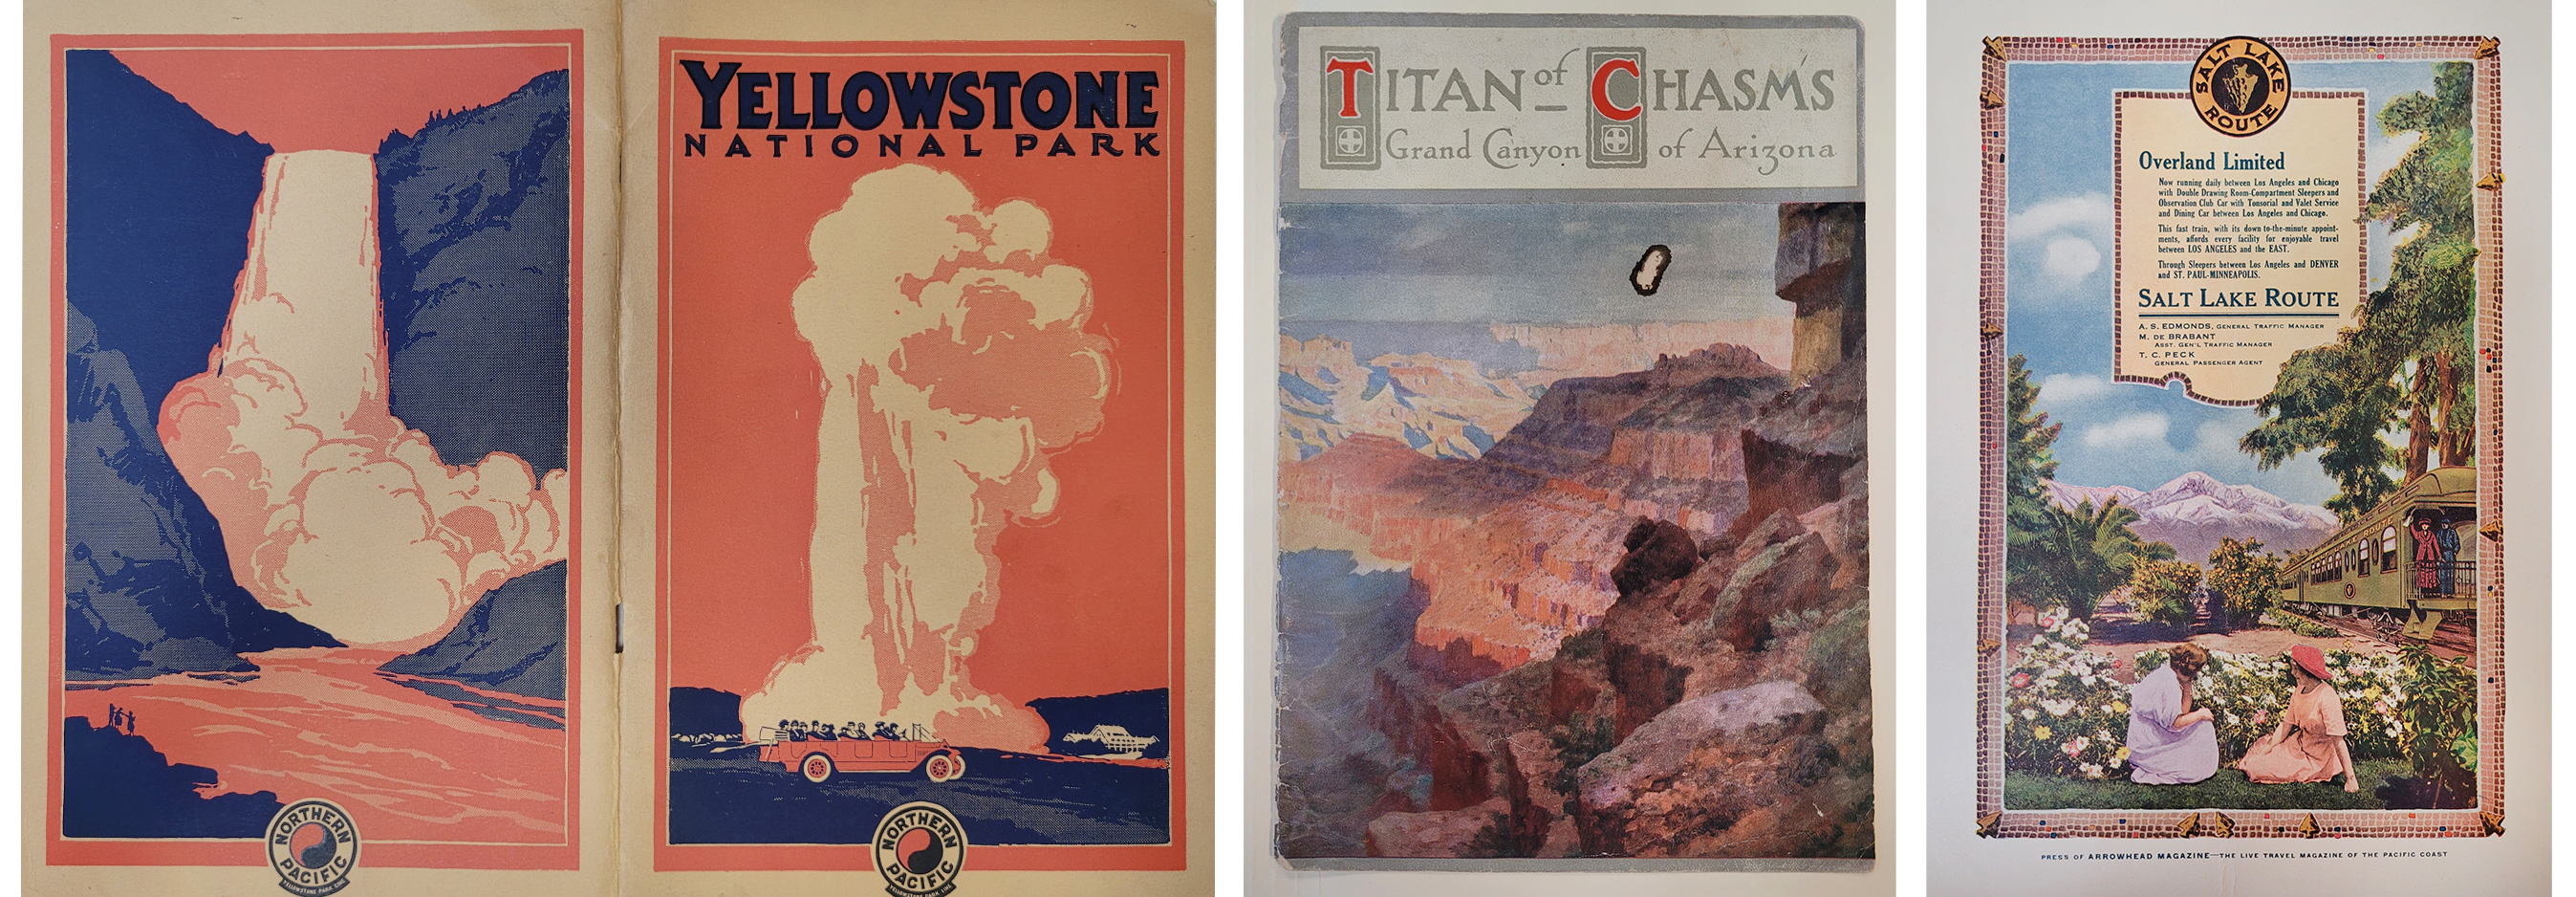 Railroad brochure covers for Yellowstone, Grand Canyon, and the Salt Lake Line with two women sitting among flowers with train in background.